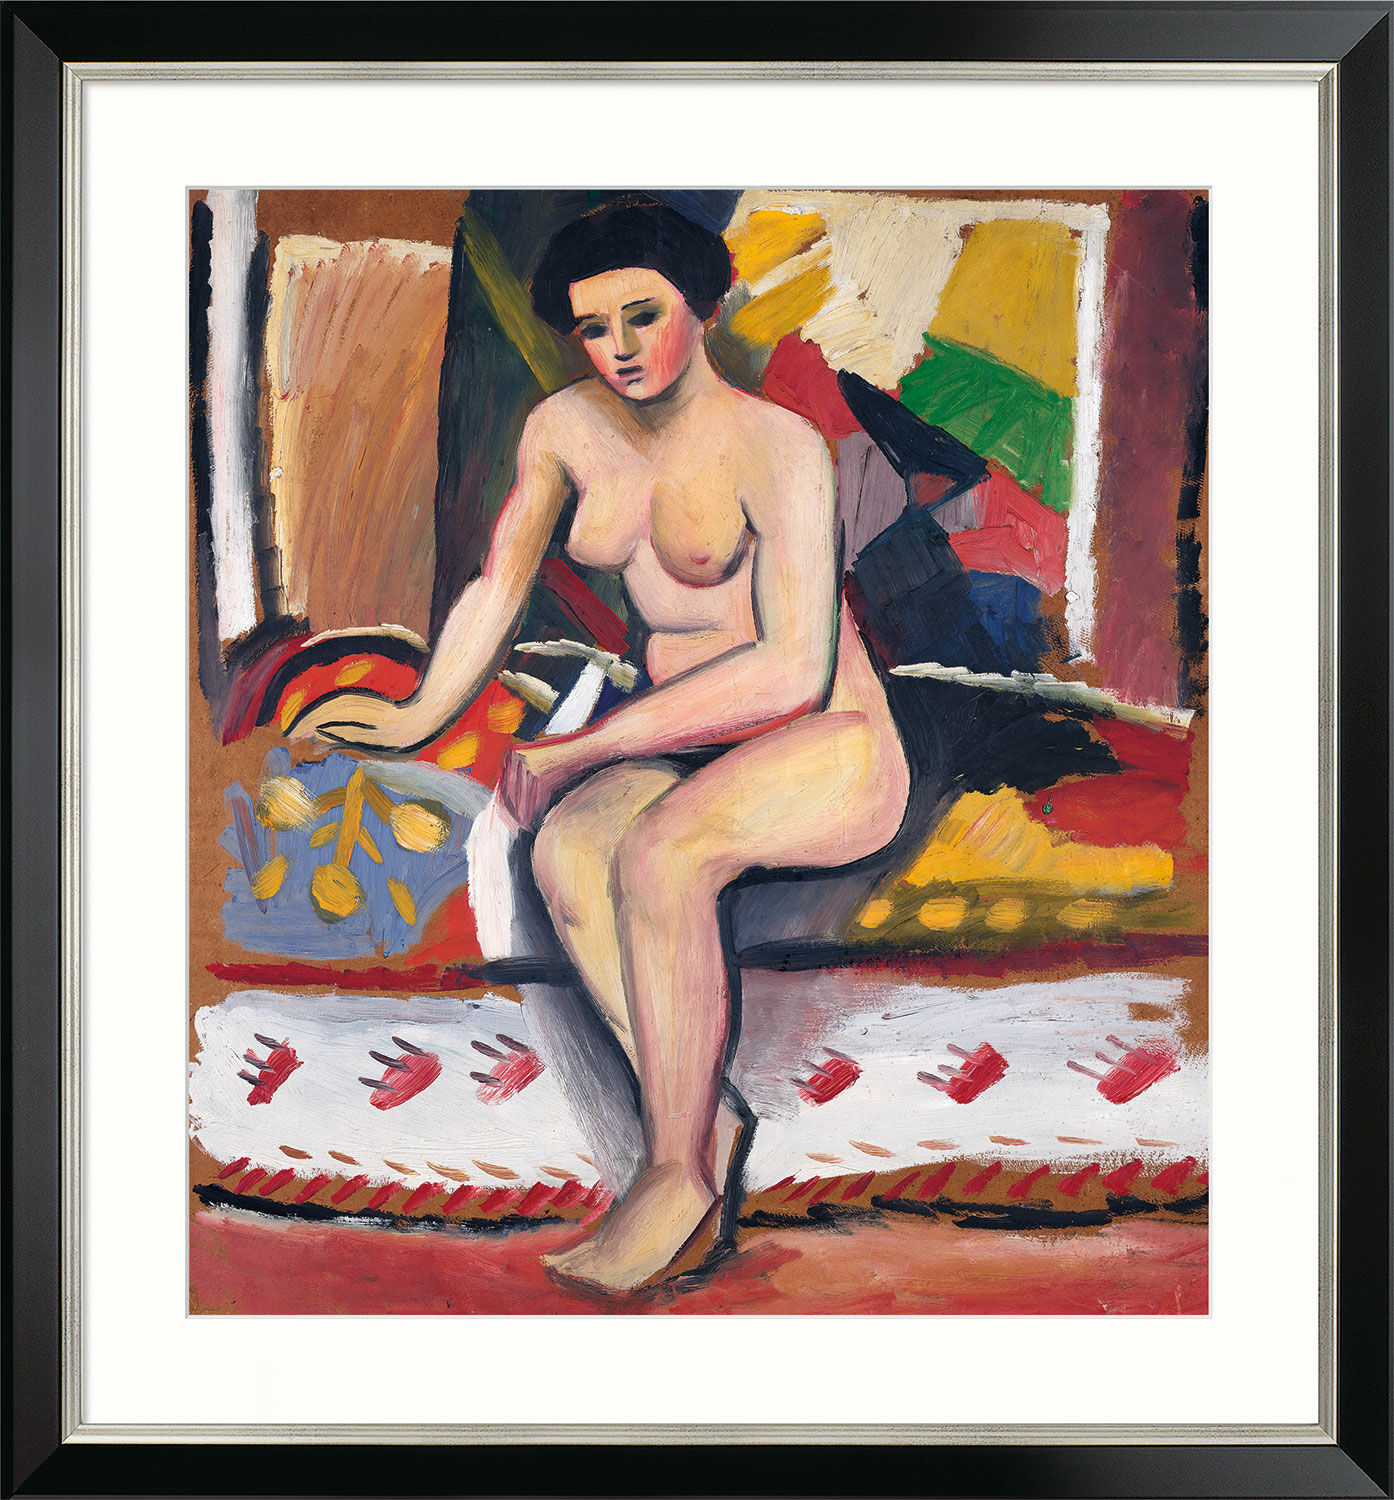 Picture "Nude" (1913), black and silver-coloured framed version by August Macke